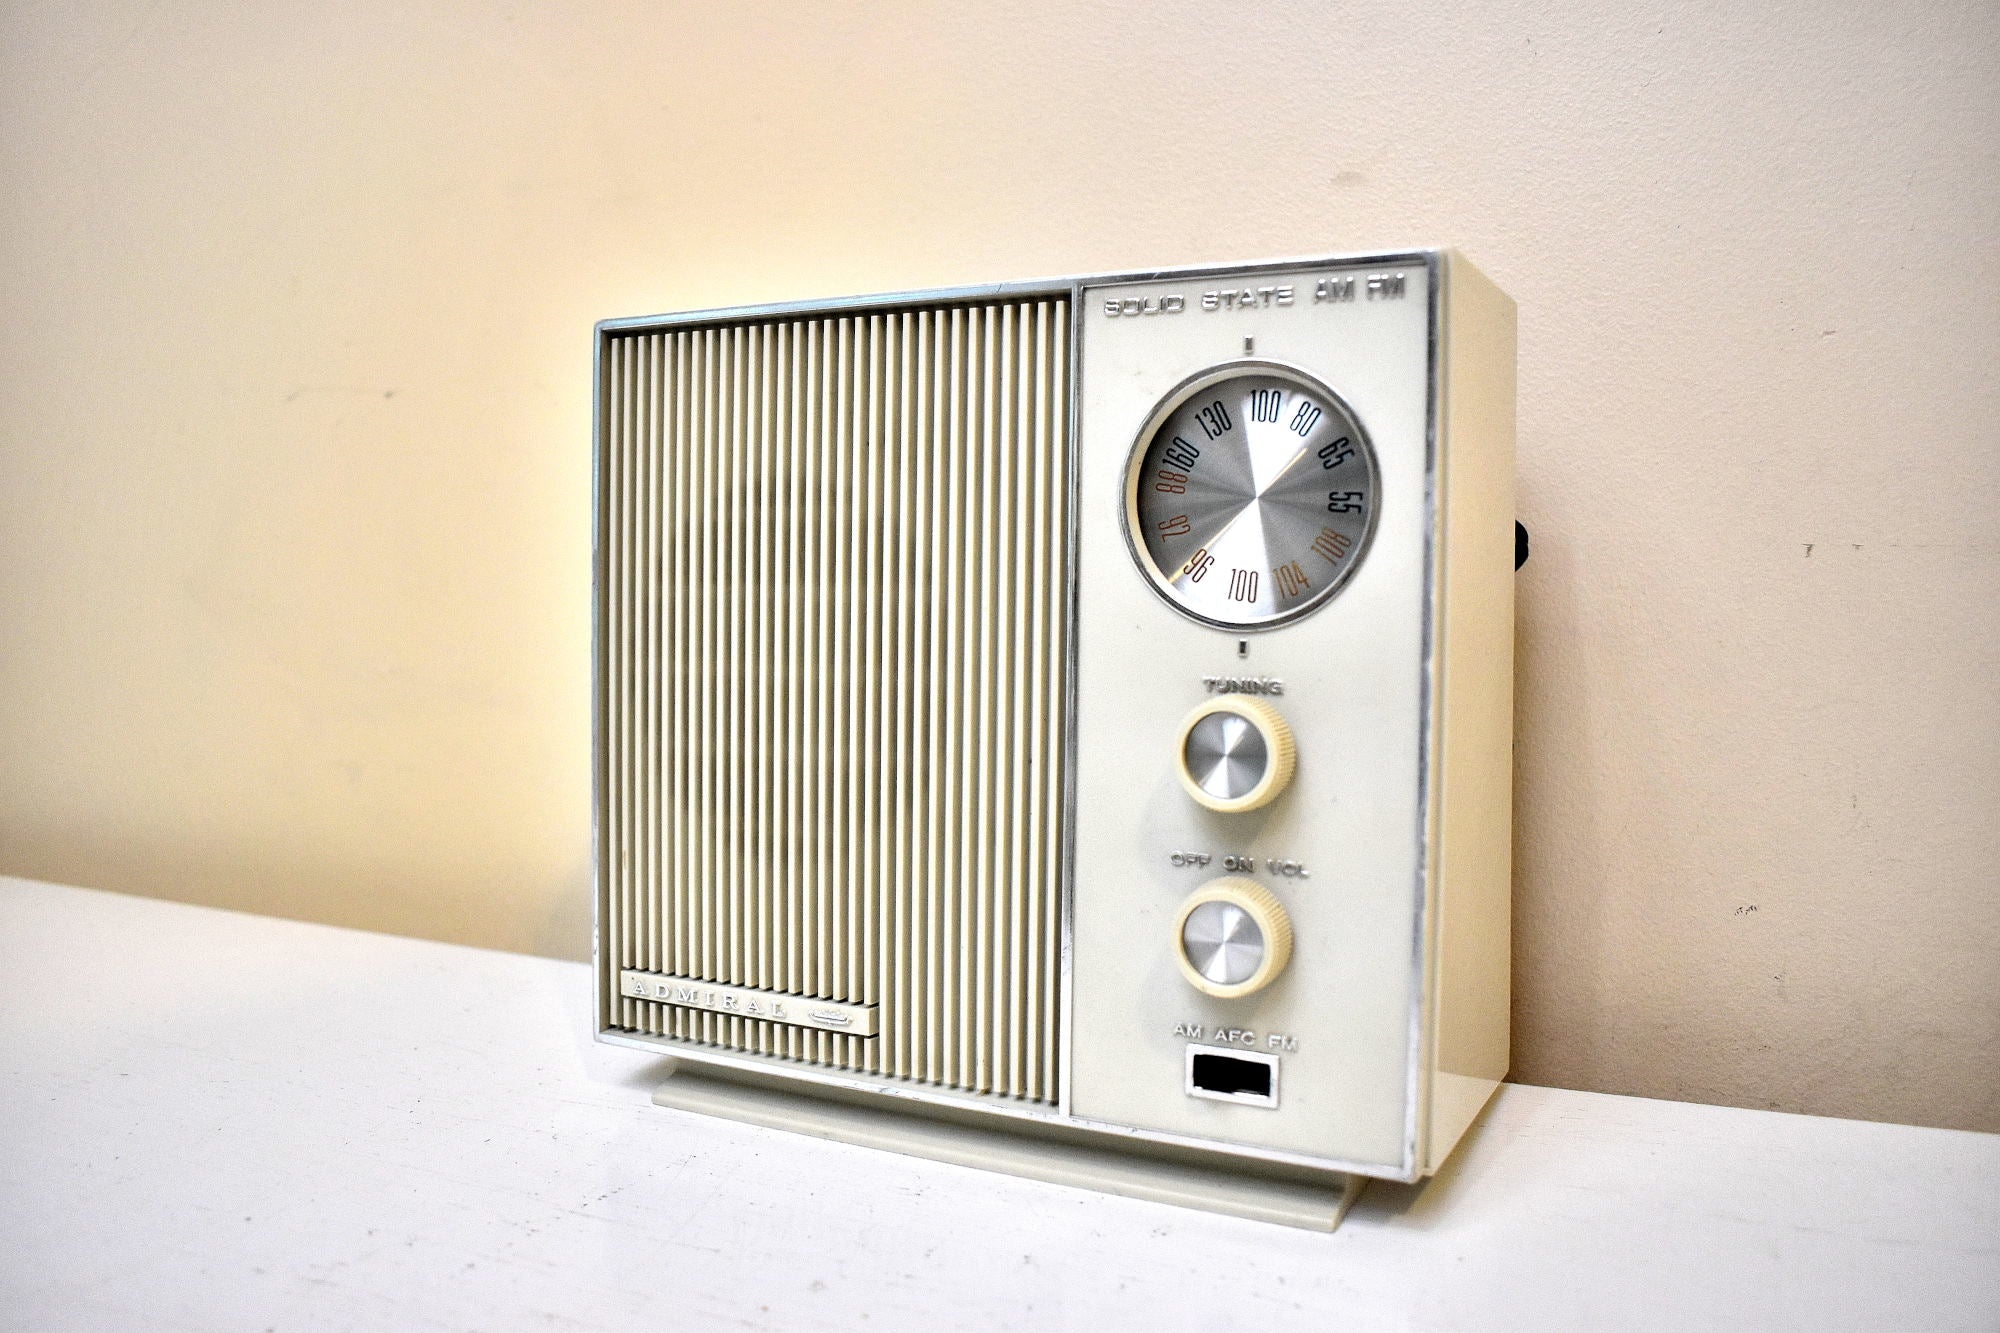 Bluetooth Ready To Go - Beige Ivory Vintage 1970 Admiral RF-103M AM/FM Solid State Radio Sounds Great!